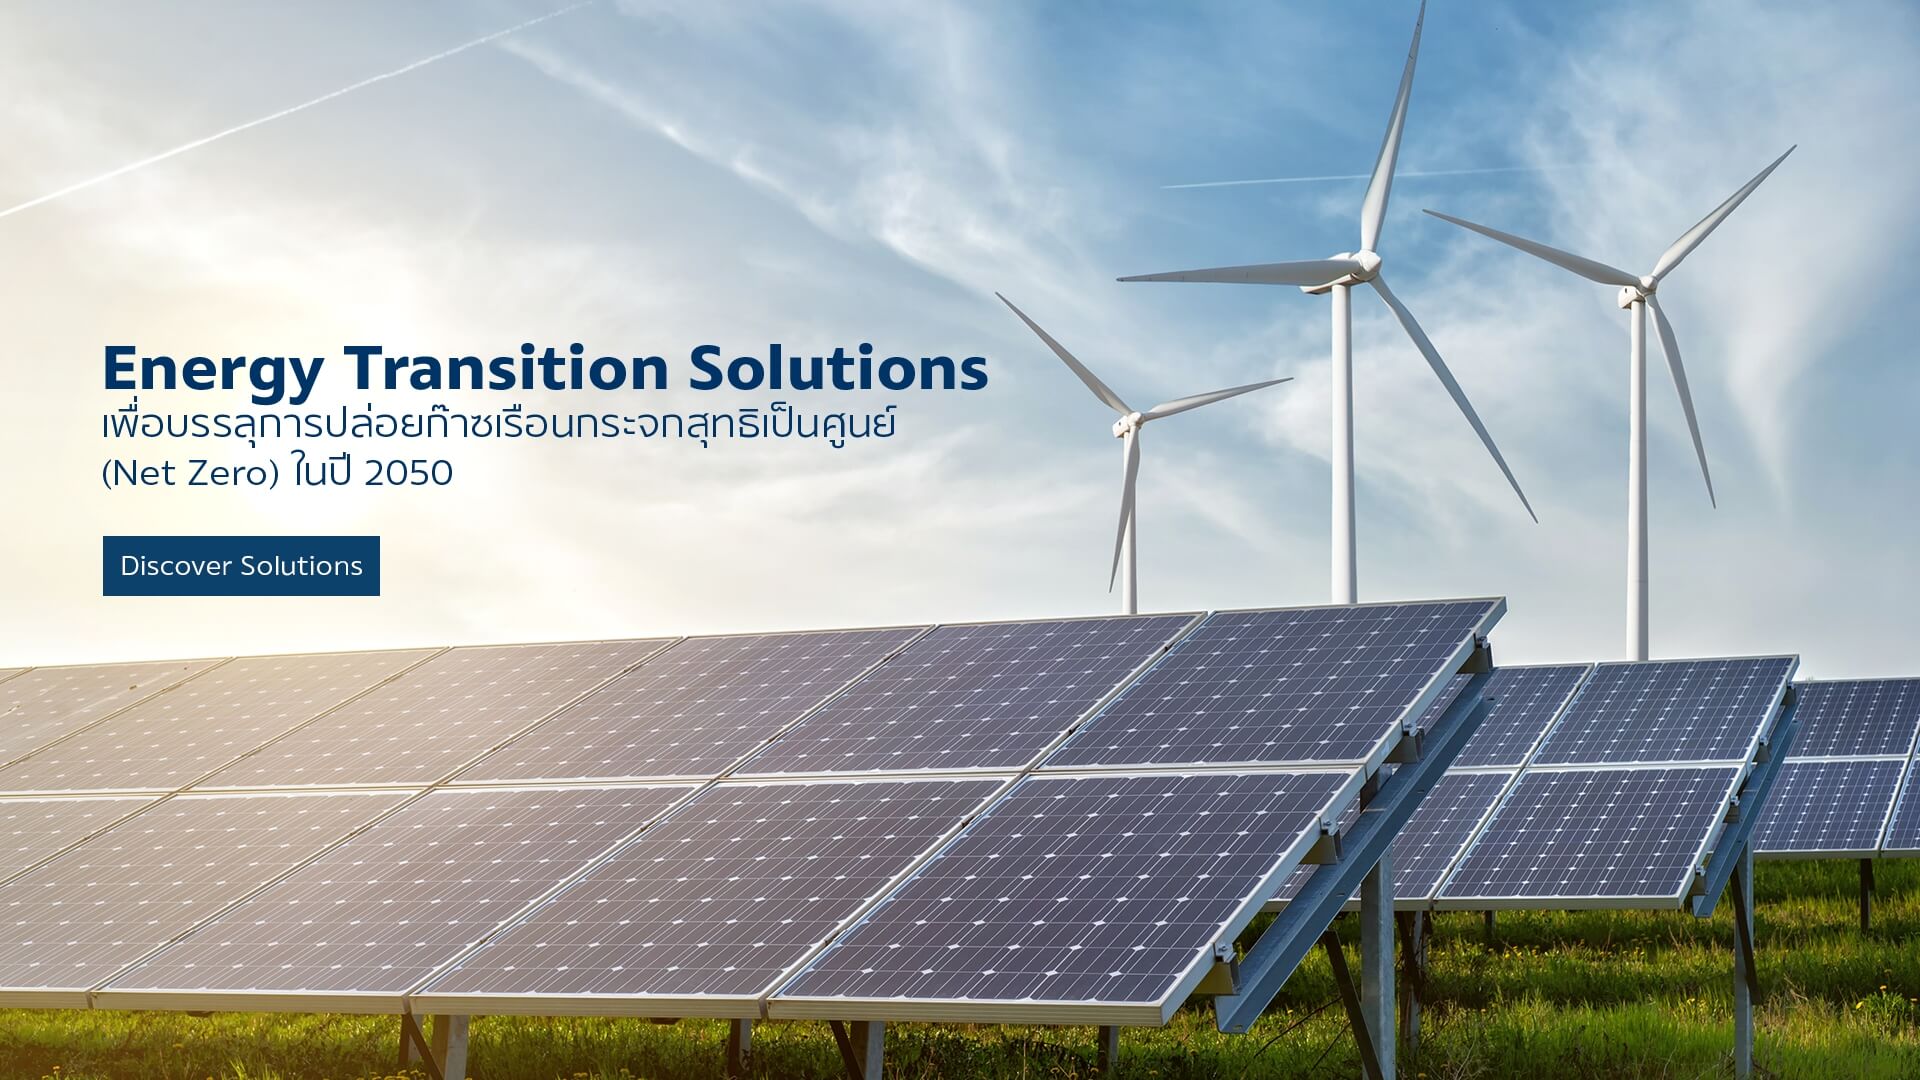 ENERGY TRANSITION SOLUTIONS